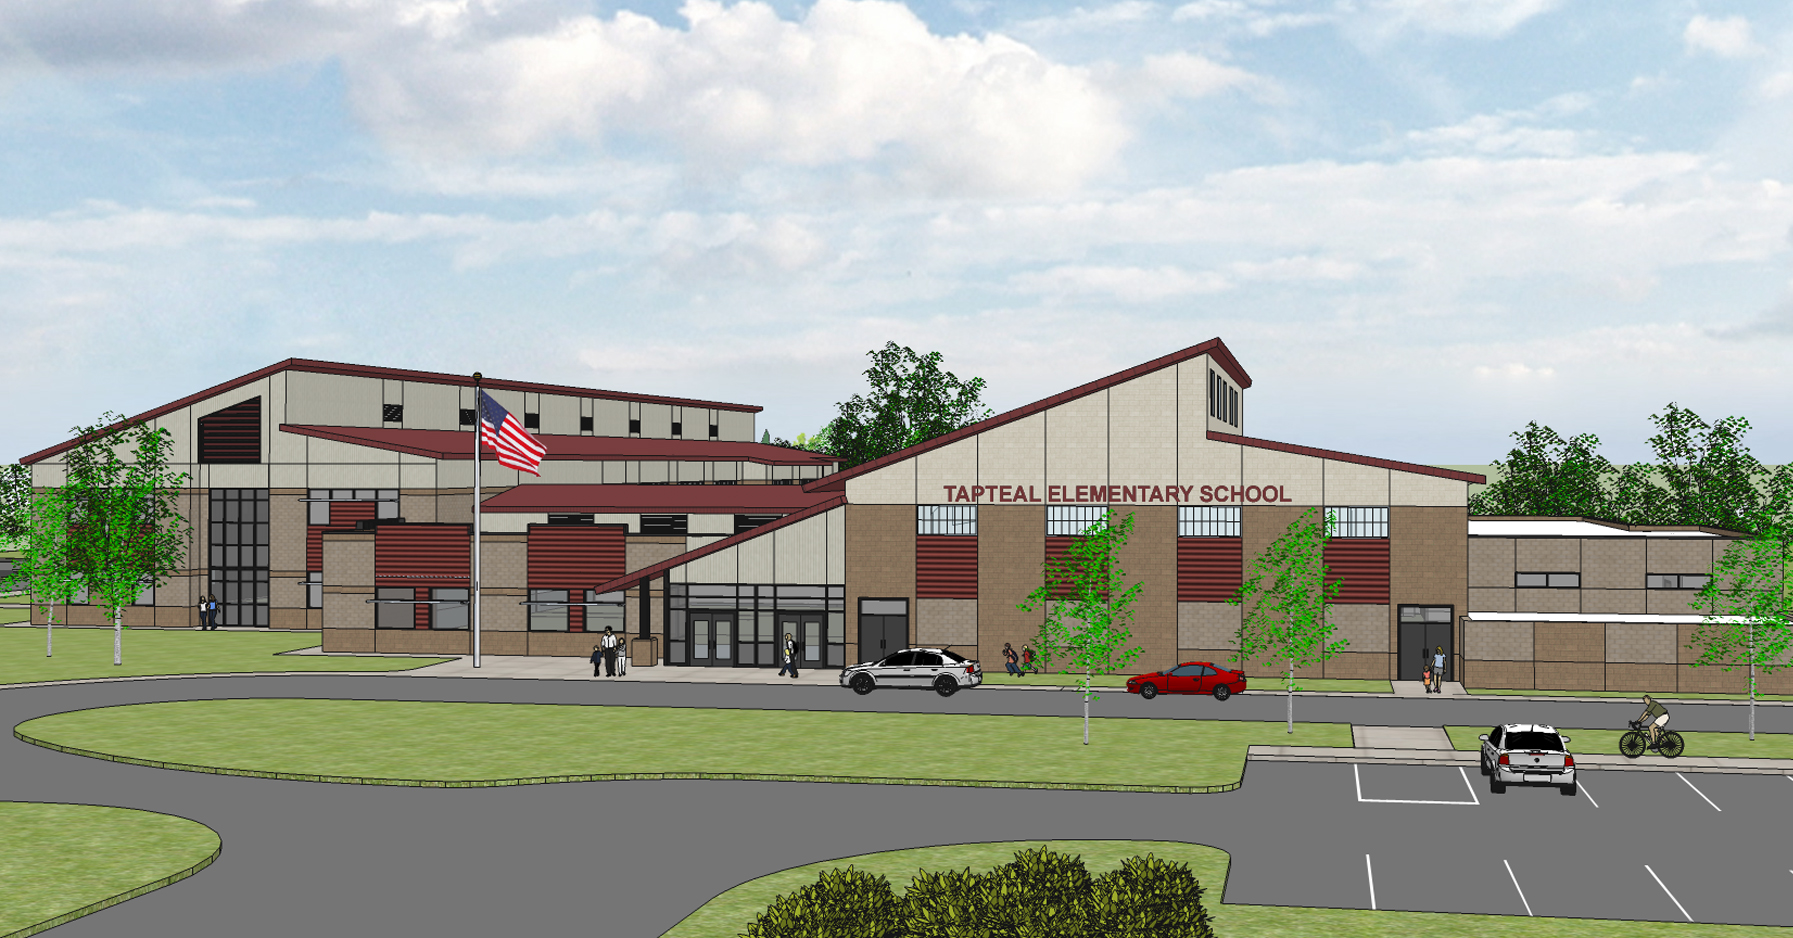 The new Tapteal Elementary School in West Richland will be 65,000 square feet and built in the same location as the existing school. This means Tapteal students will spend a year at elementary school No. 11, currently under construction off Keene Road in West Richland, for the 2019-20 school year. (Photo: Richland School District)